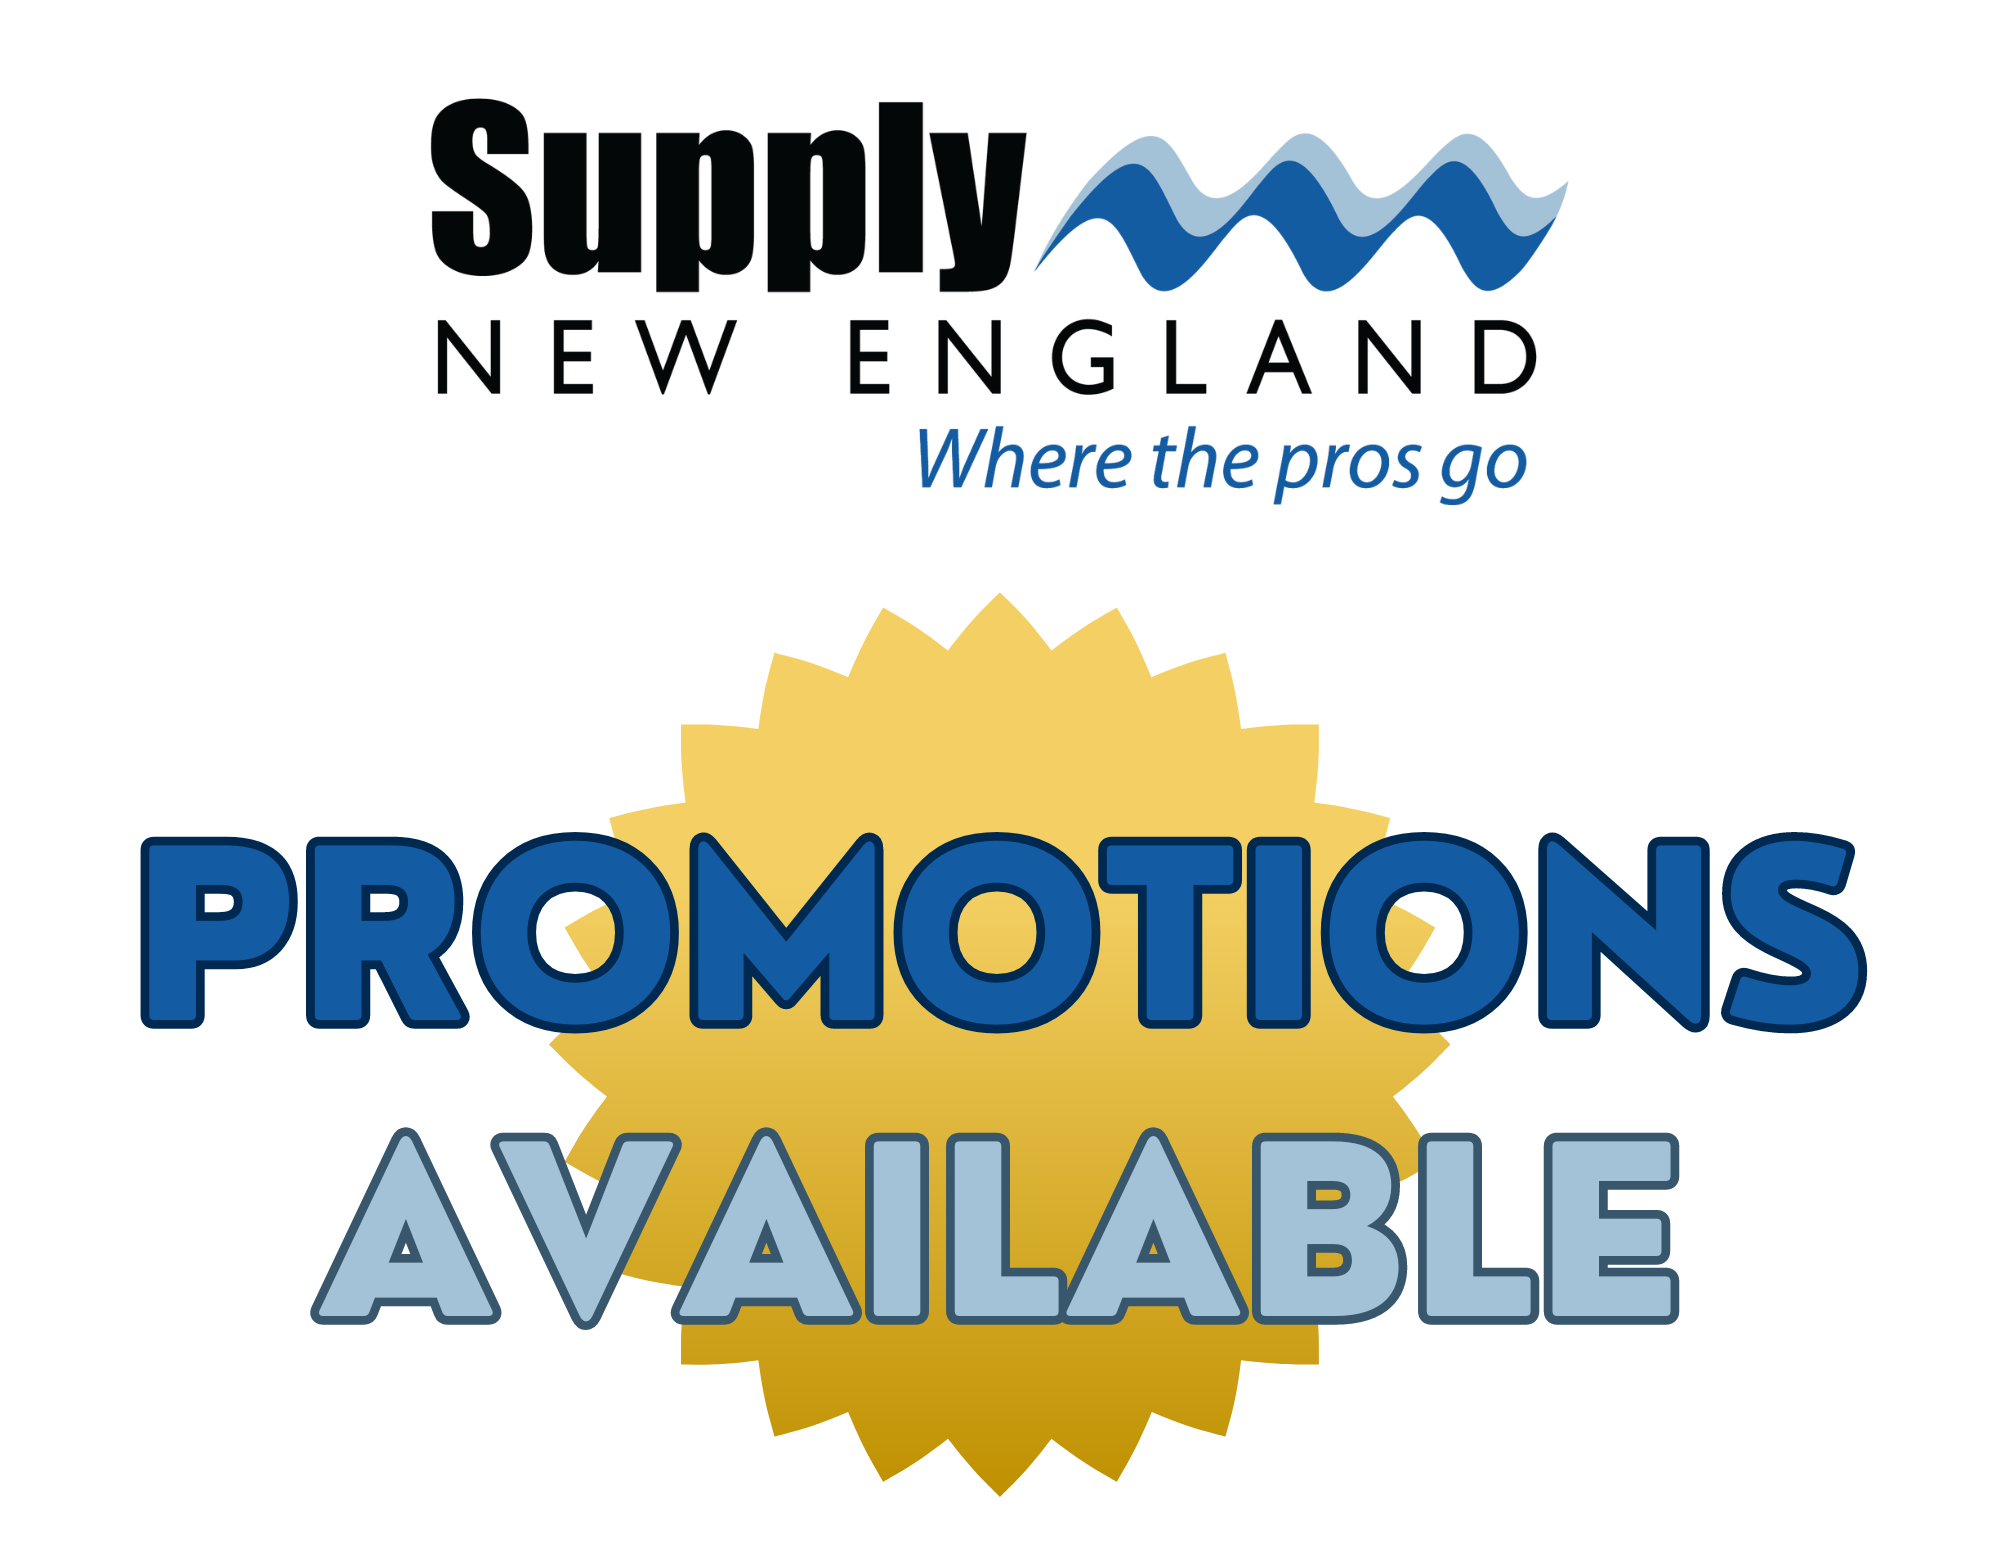 2023 – 2024 Promotions will be available to you!